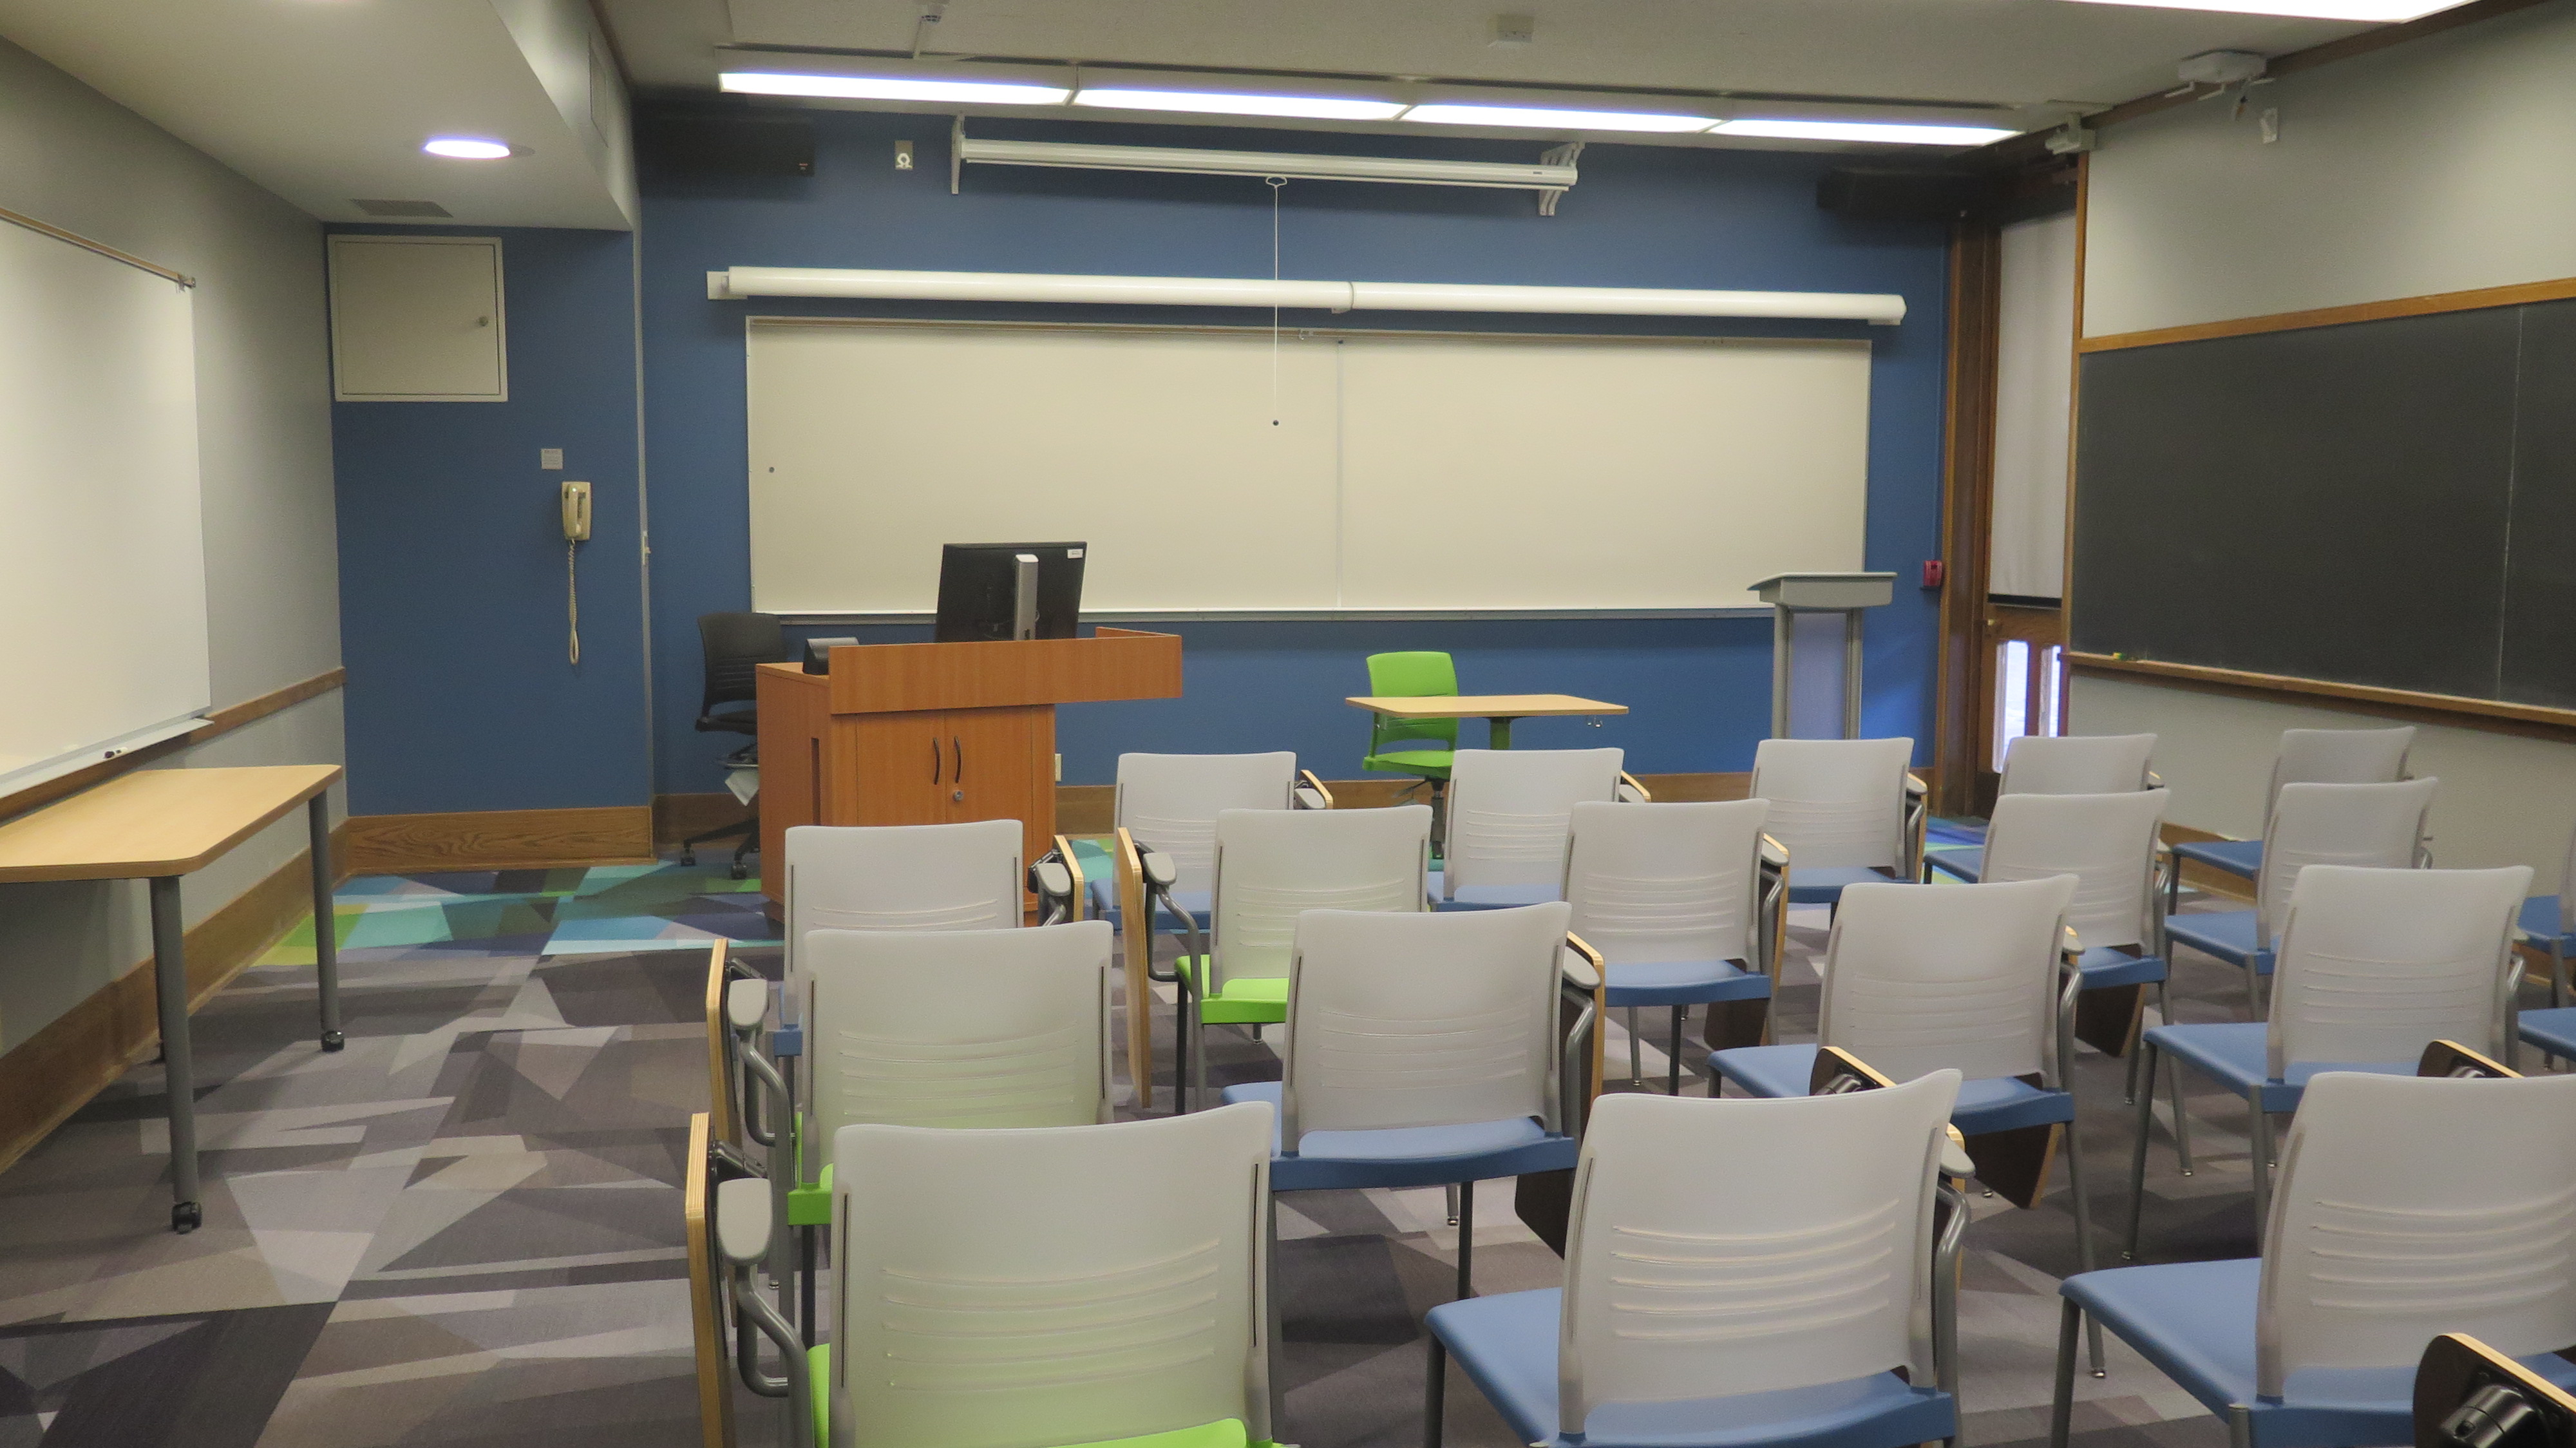 View from the back of the room, Moveable tablet arm chairs, Carpet floors, White board on the front wall, chalkboards on the outer walls of classroom.